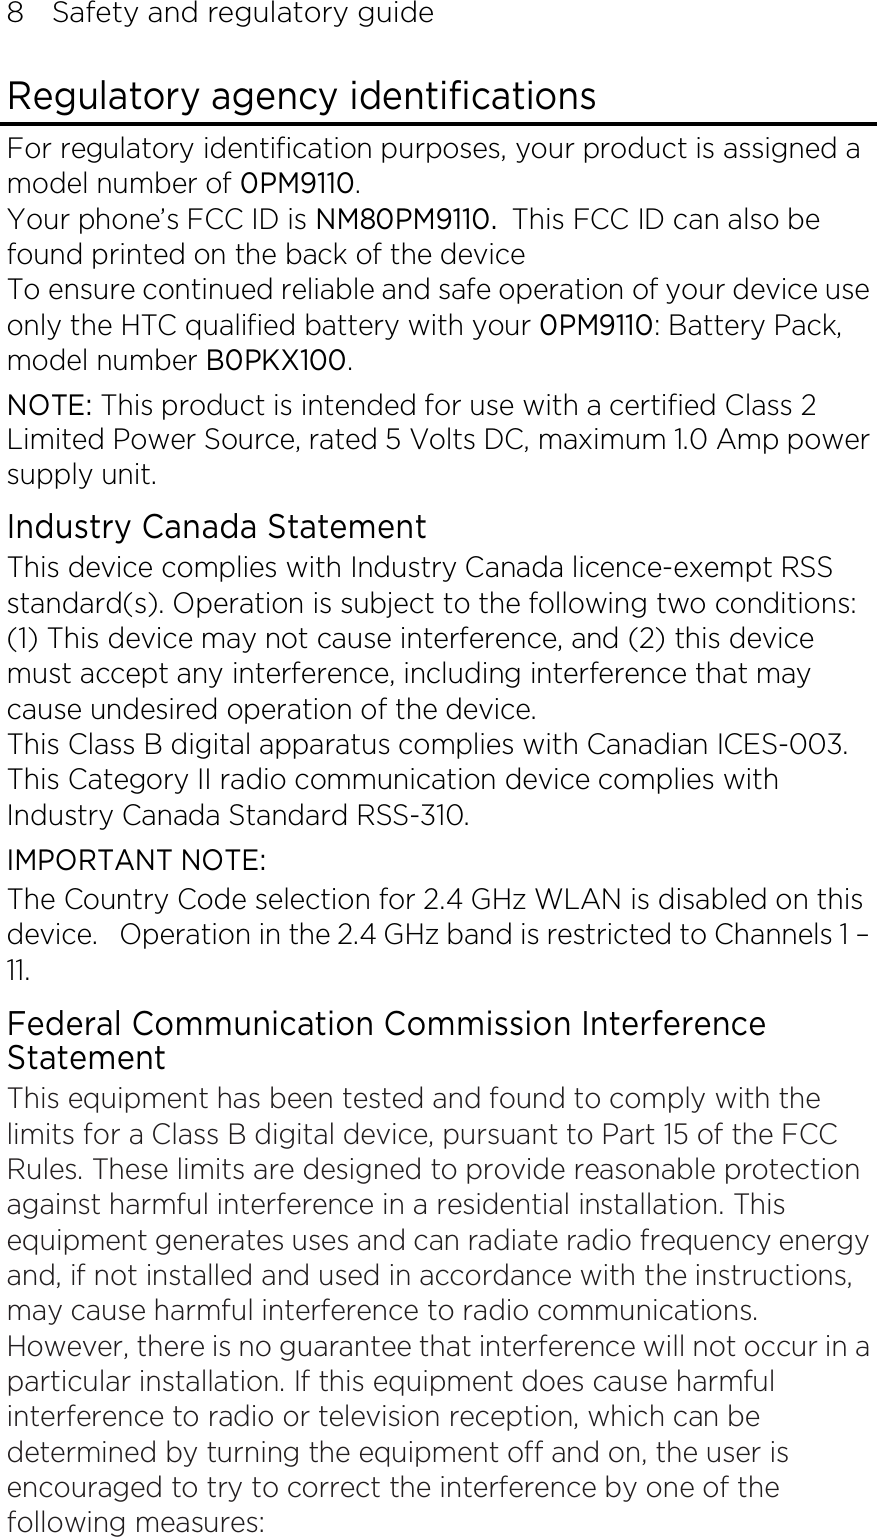 8    Safety and regulatory guide Regulatory agency identifications For regulatory identification purposes, your product is assigned a model number of 0PM9110. Your phone’s FCC ID is NM80PM9110. This FCC ID can also be found printed on the back of the device To ensure continued reliable and safe operation of your device use only the HTC qualified battery with your 0PM9110: Battery Pack, model number B0PKX100. NOTE: This product is intended for use with a certified Class 2 Limited Power Source, rated 5 Volts DC, maximum 1.0 Amp power supply unit. Industry Canada Statement This device complies with Industry Canada licence-exempt RSS standard(s). Operation is subject to the following two conditions: (1) This device may not cause interference, and (2) this device must accept any interference, including interference that may cause undesired operation of the device. This Class B digital apparatus complies with Canadian ICES-003. This Category II radio communication device complies with Industry Canada Standard RSS-310.   IMPORTANT NOTE: The Country Code selection for 2.4 GHz WLAN is disabled on this device.   Operation in the 2.4 GHz band is restricted to Channels 1 – 11. Federal Communication Commission Interference Statement This equipment has been tested and found to comply with the limits for a Class B digital device, pursuant to Part 15 of the FCC Rules. These limits are designed to provide reasonable protection against harmful interference in a residential installation. This equipment generates uses and can radiate radio frequency energy and, if not installed and used in accordance with the instructions, may cause harmful interference to radio communications. However, there is no guarantee that interference will not occur in a particular installation. If this equipment does cause harmful interference to radio or television reception, which can be determined by turning the equipment off and on, the user is encouraged to try to correct the interference by one of the following measures: 